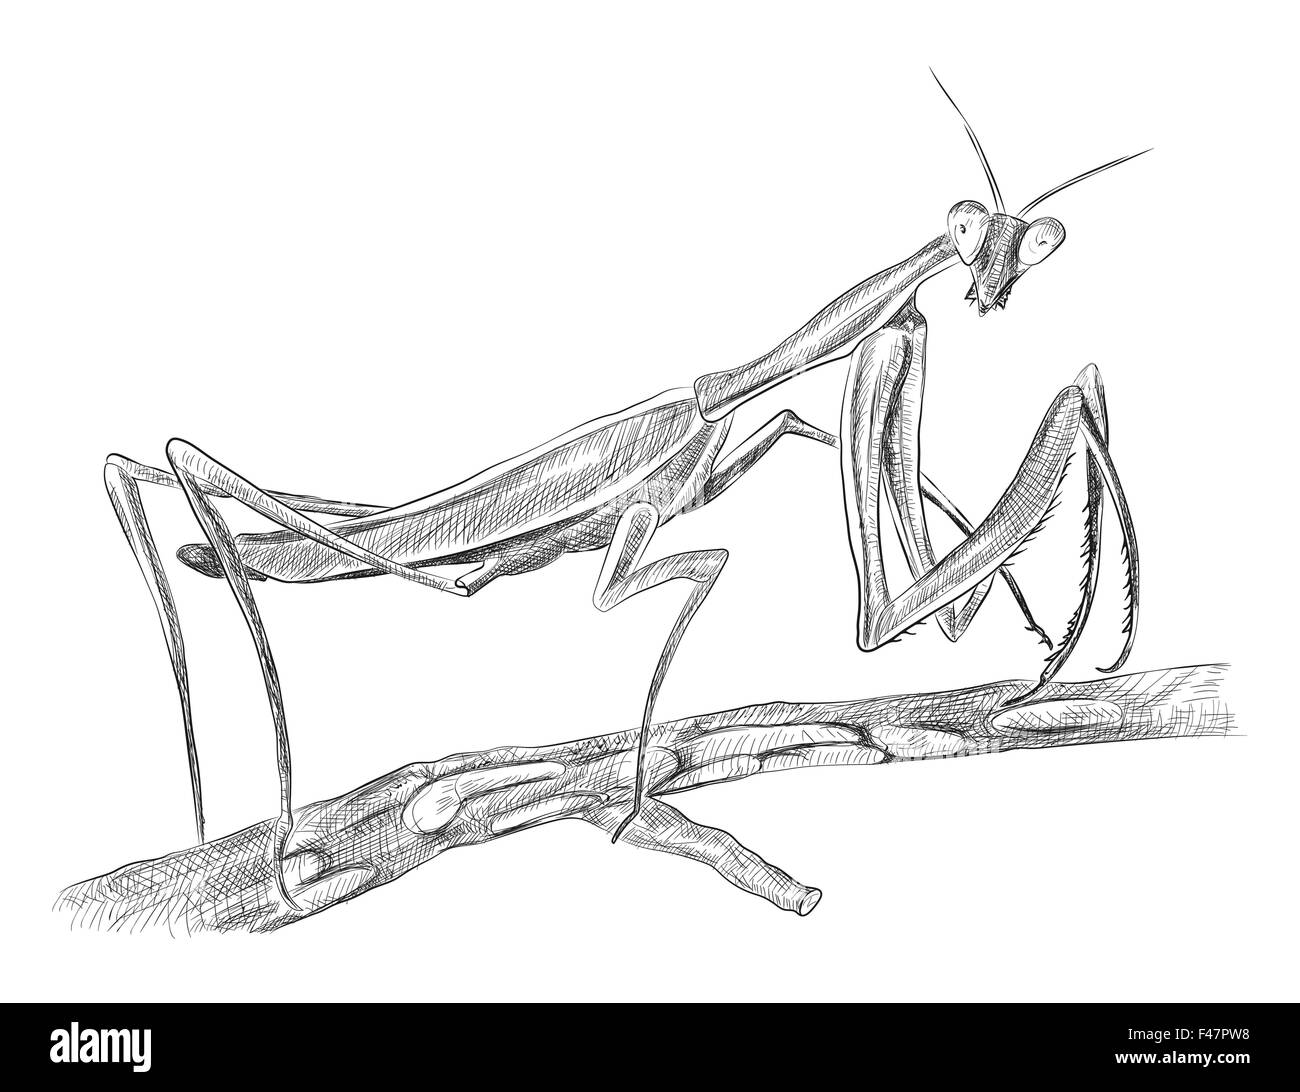 Mantis religiosa sitting on tree, side view, black and white hand drawn vector sketch Stock Vector